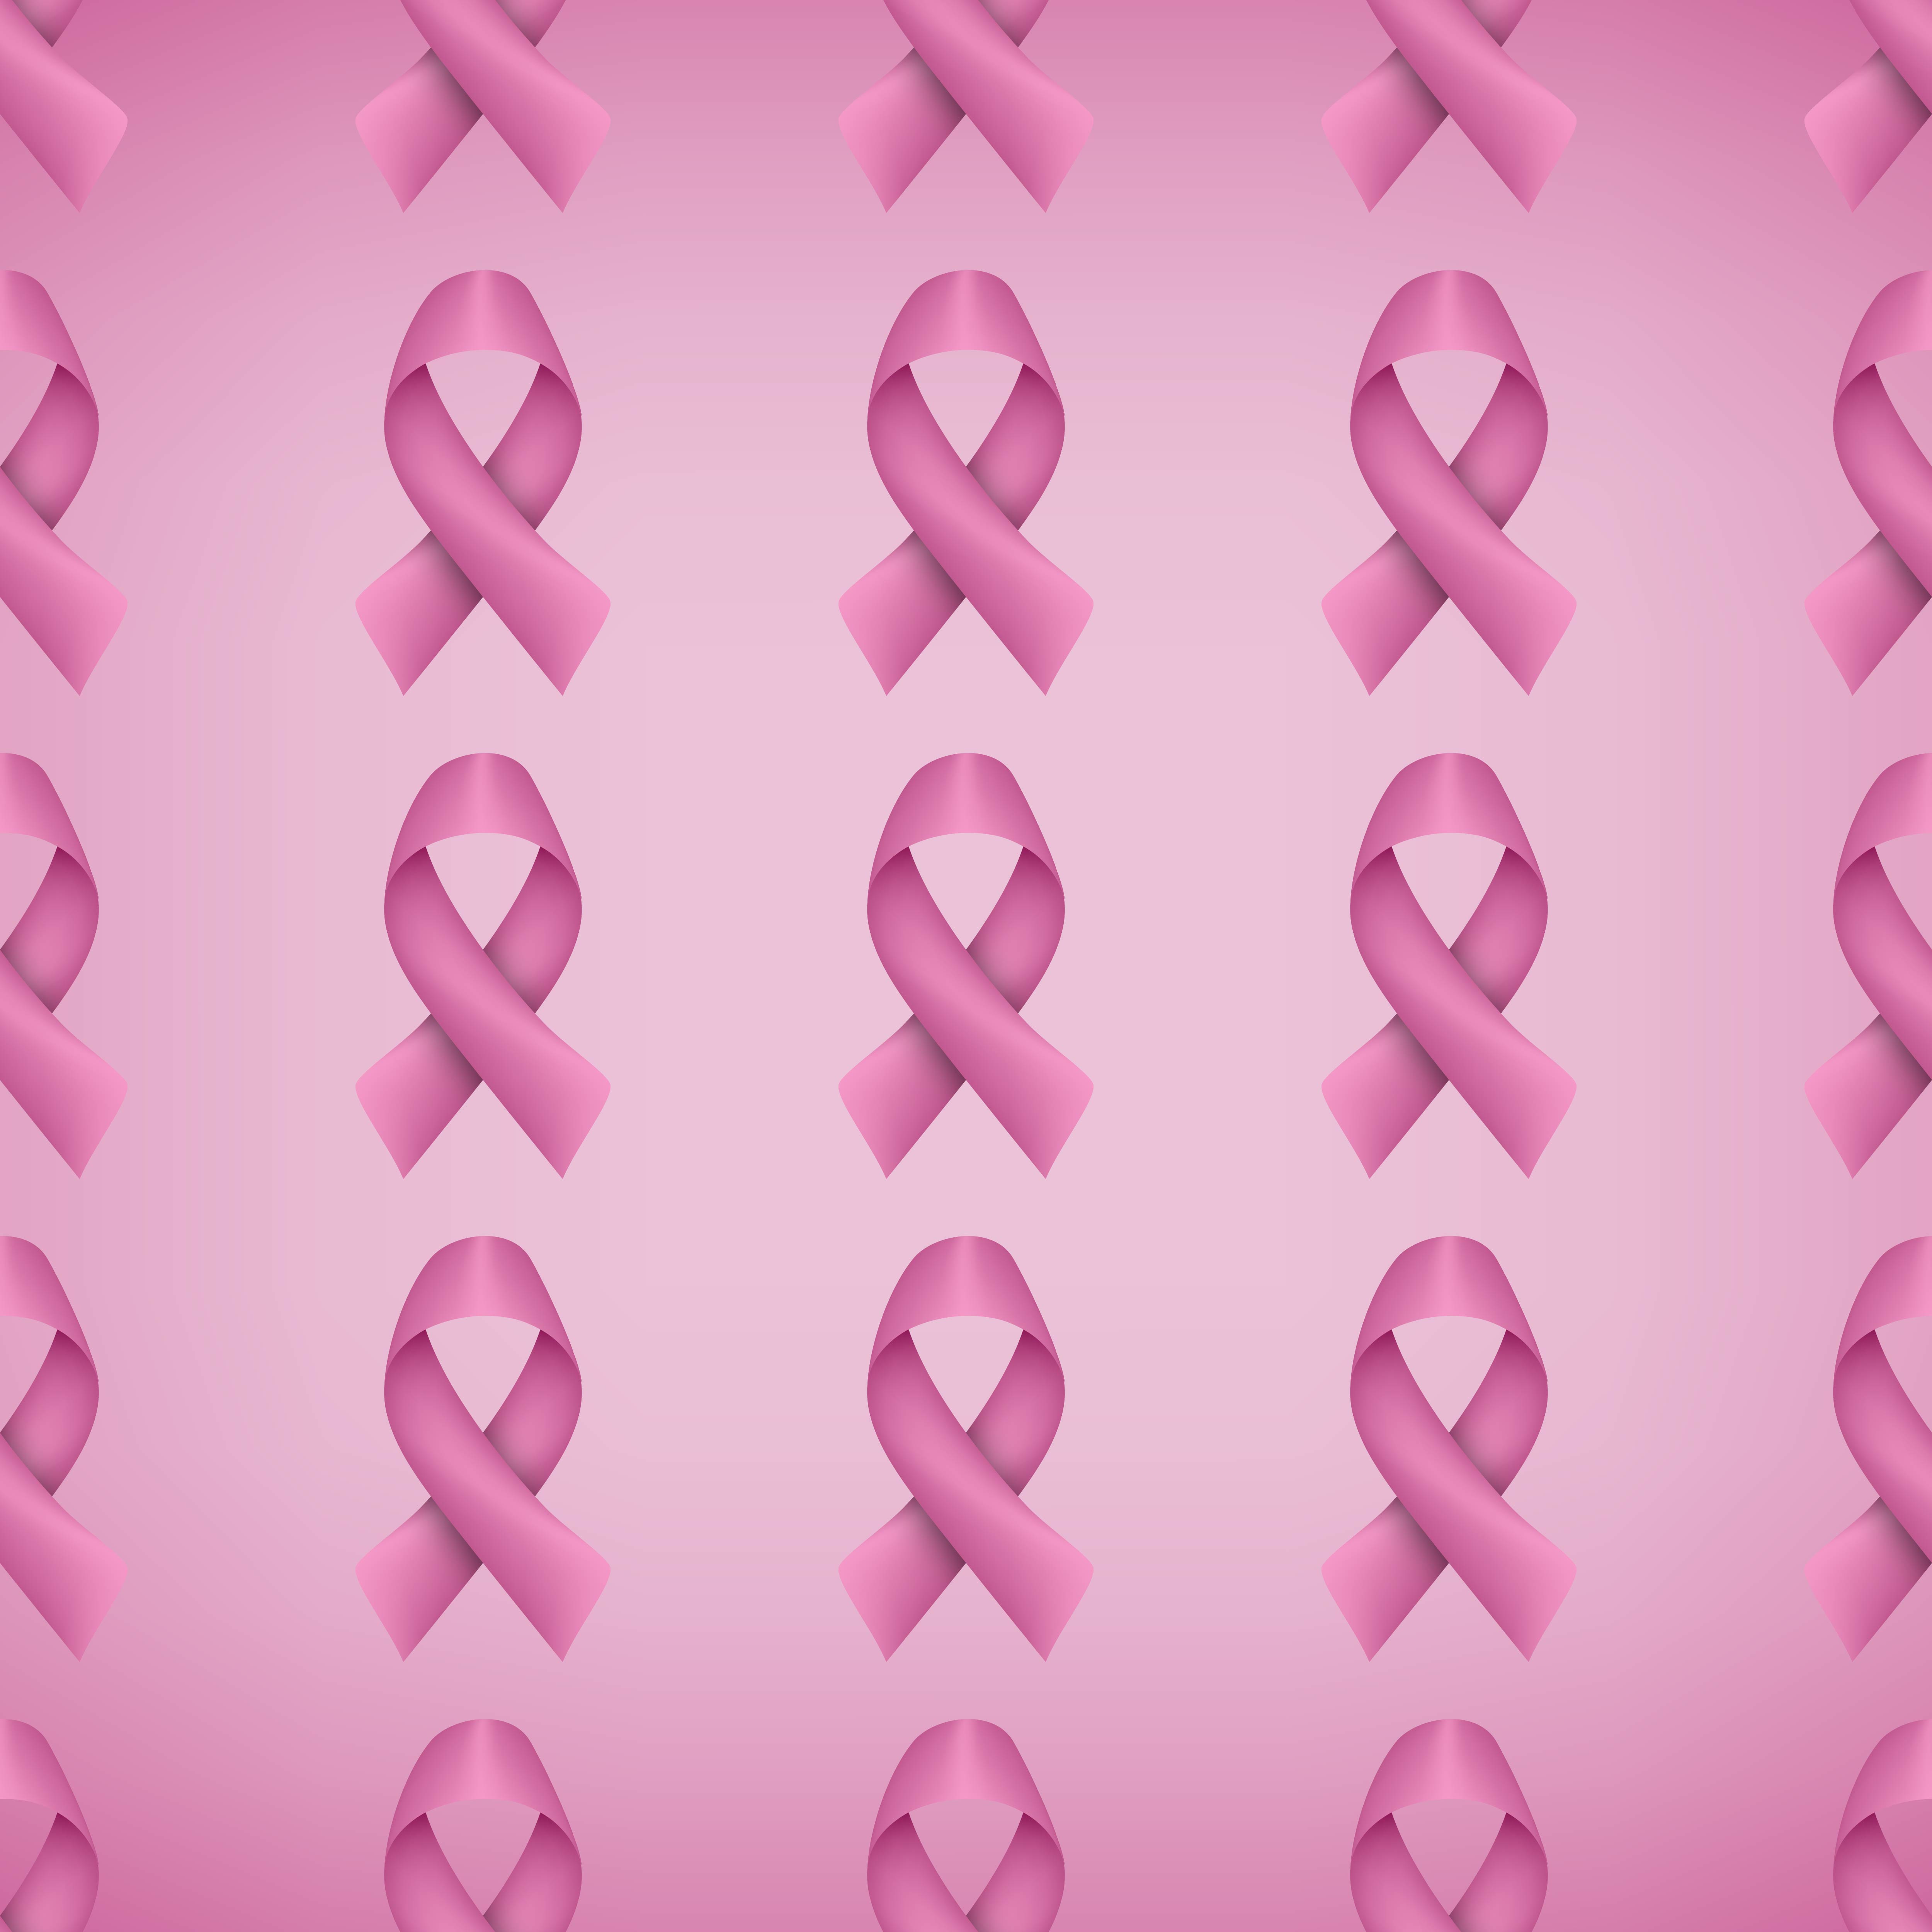 breast-cancer-awareness-realistic-pink-ribbon-seamless-pattern-676949